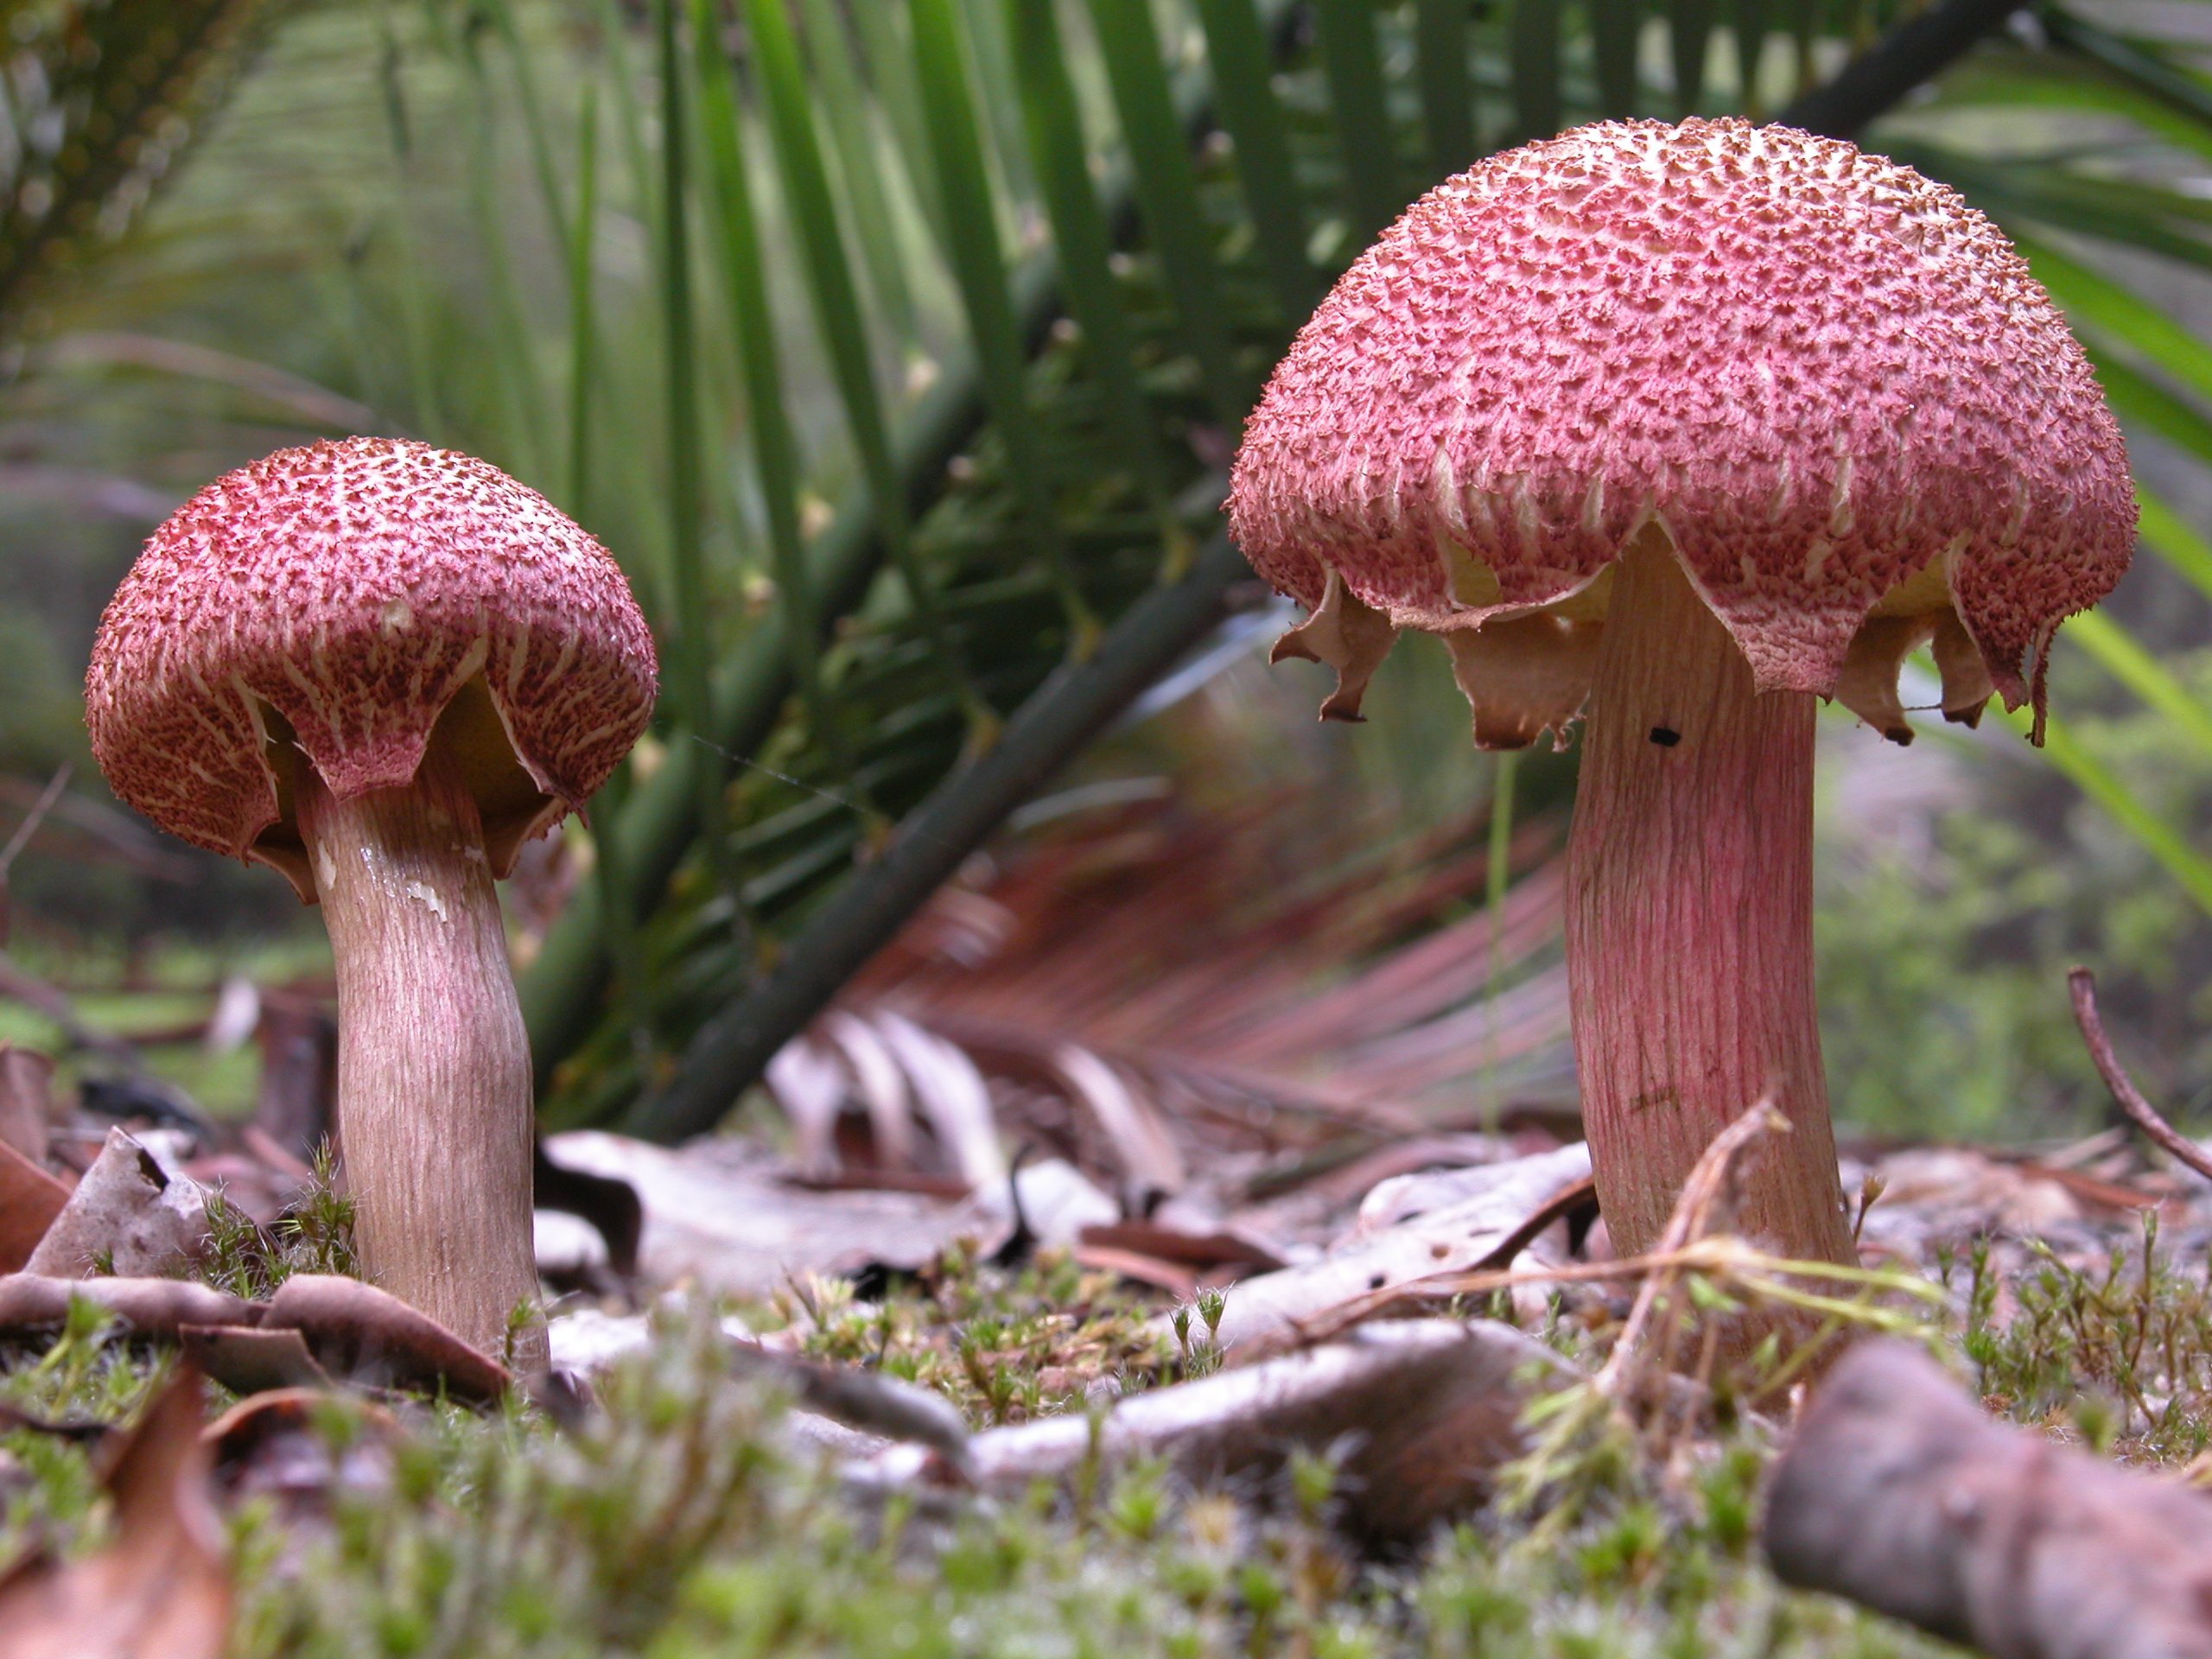 A pair of bright pink mushrooms grow on a forest floor